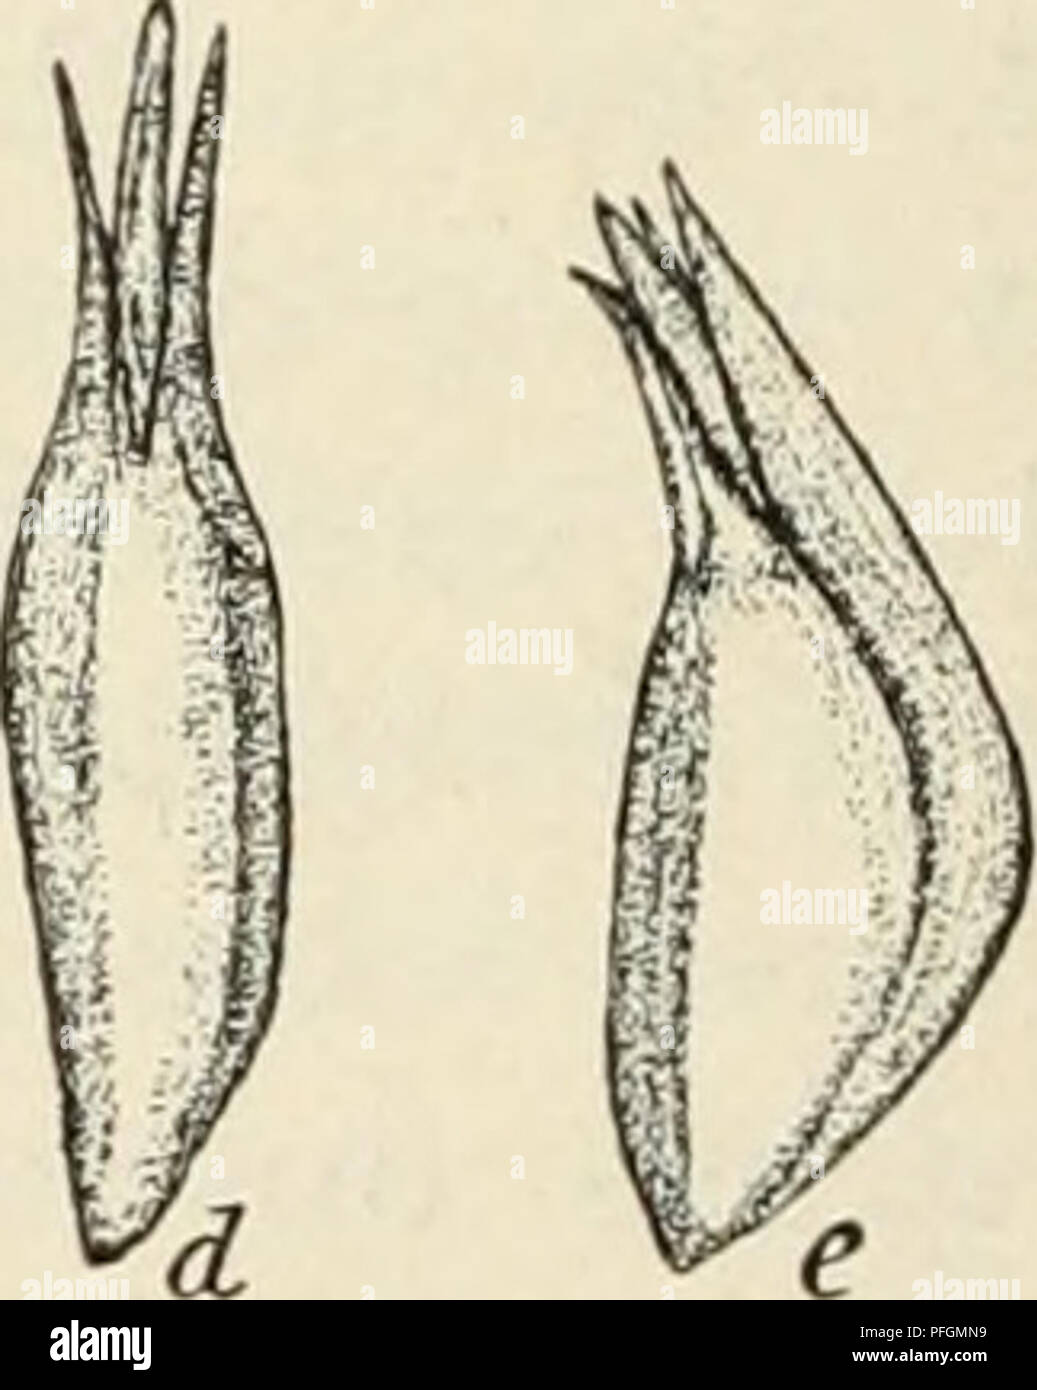 . Dansk botanisk arkiv. Plants; Plants -- Denmark. Fig. 22. Posidonia australis, from Géraldton. a, The irregularly three-lobed exocarp opened, b and c, Two different fruits, showing the splitting of the exocarp beginning at the base, d and e, &quot;Stones&quot; of b and c; the plumule protruding at the apex, f, Embryo (of e). (About 5/4 nat. size). judge from analogy with P. oceanica, which flowers in the autumn and ripens its fruits in the next spring, the flowering of P. au- stralis should take place during the autumn of the southern he- misphere, i. e. in March—May, and the fruits should r Stock Photo